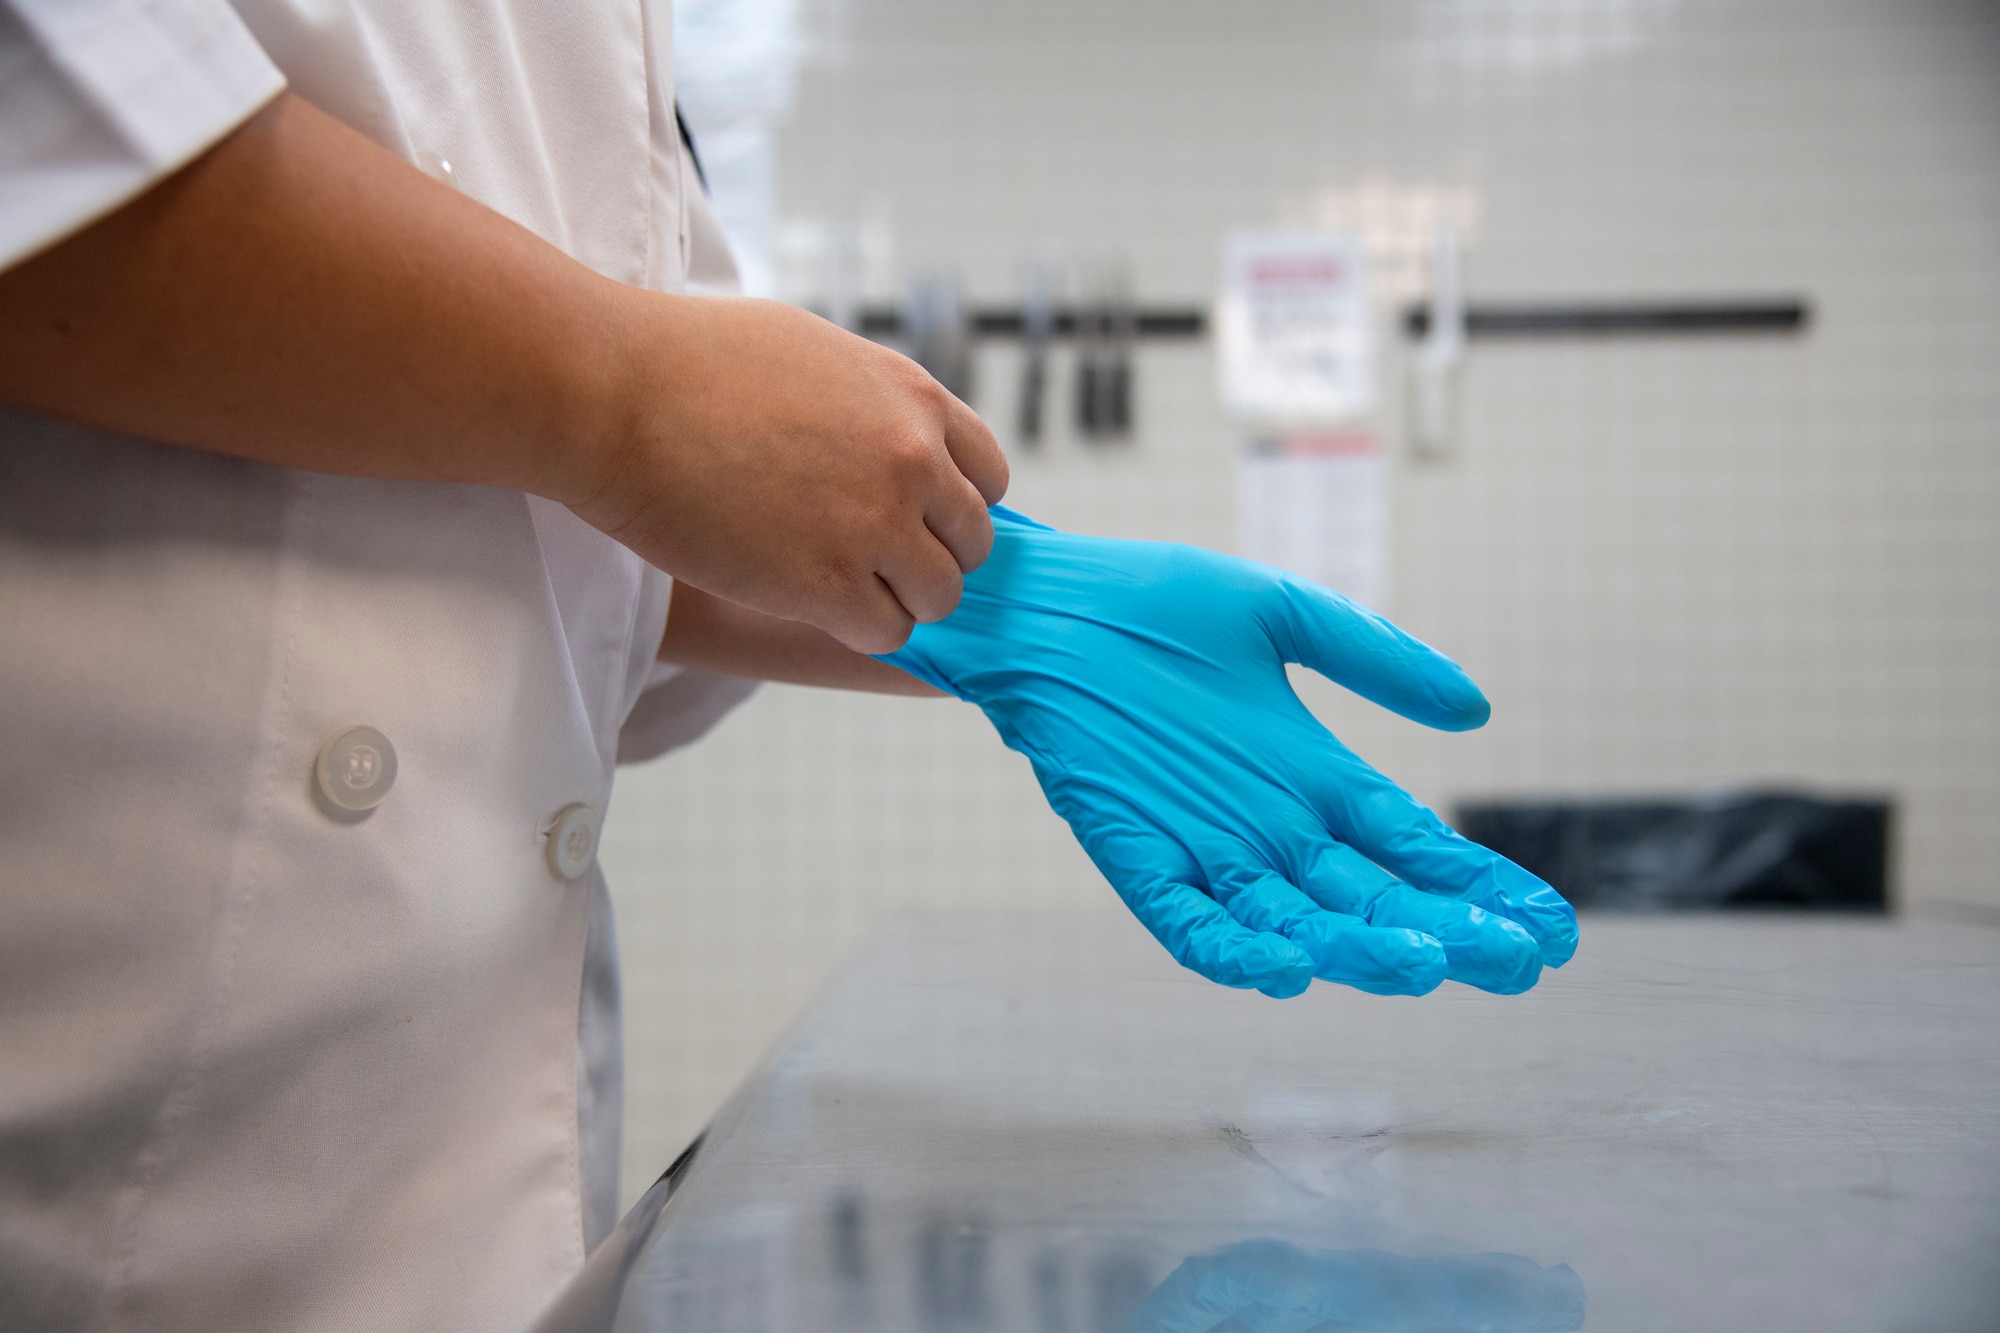 U.S. Air Force Senior Airman Haley Garces, 6th Force Support Squadron food services journeyman, dons a pair of gloves at MacDill Air Force Base, Florida, June 15, 2021.